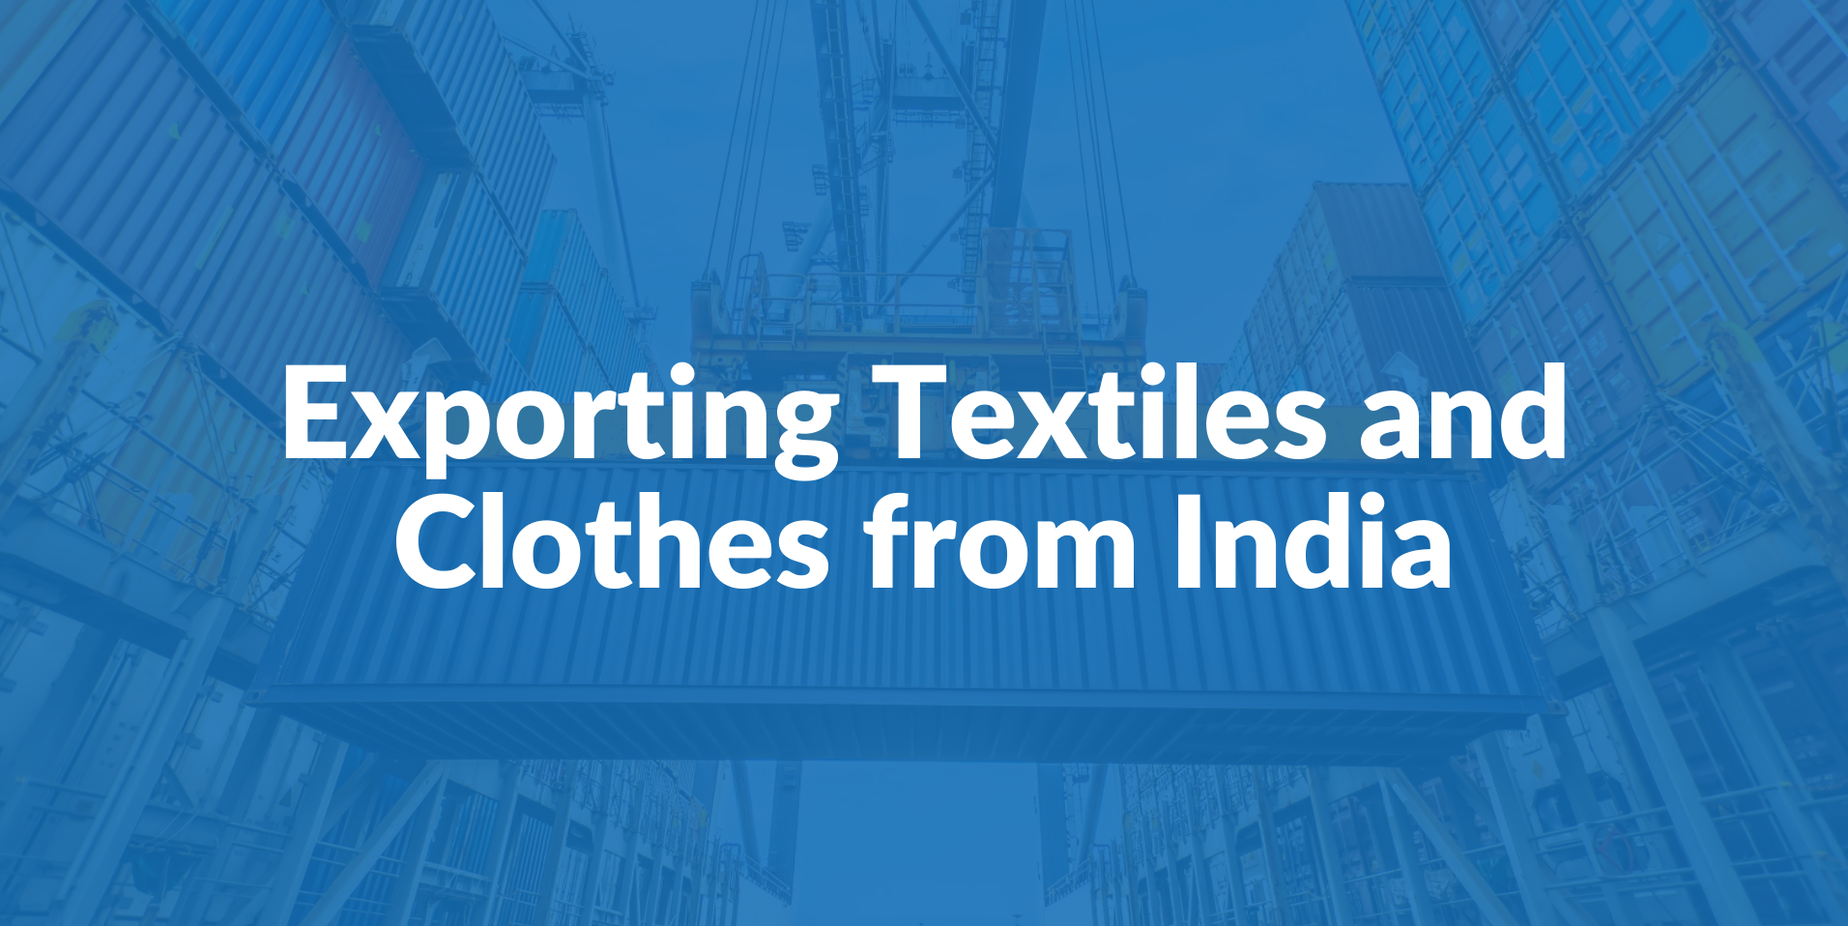 export textiles and clothes from India